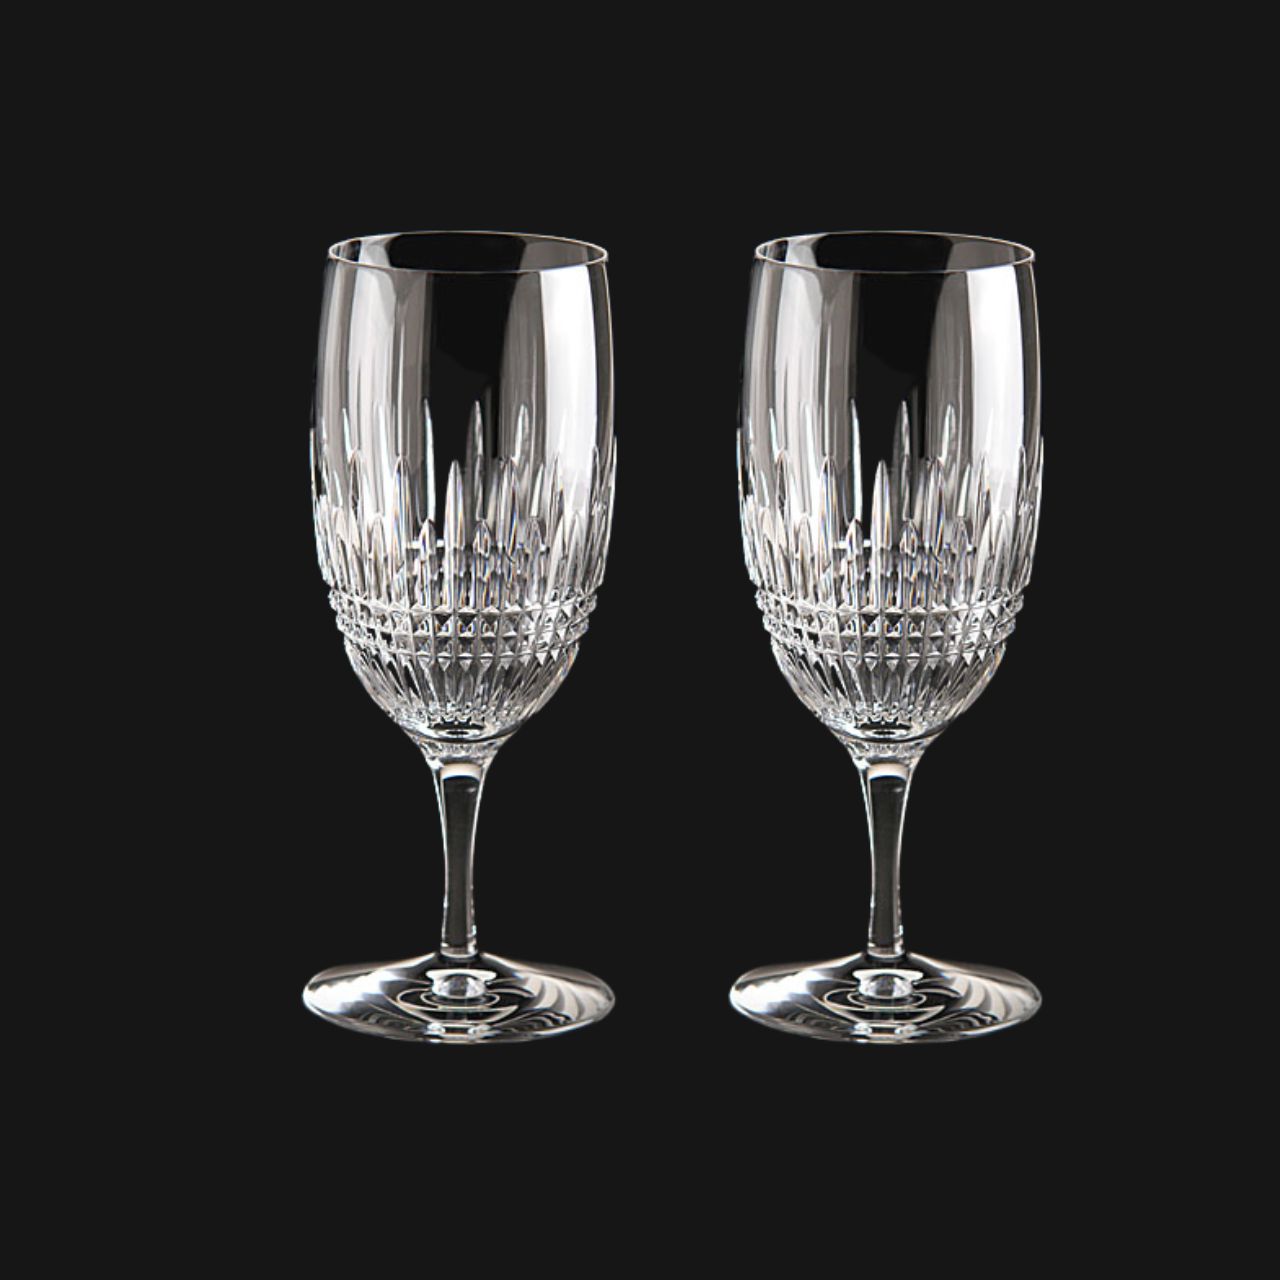 Waterford Crystal Lismore Diamond Essence Iced Beverage Set  Lismore Diamond Essence pairs the contemporary contours of the Essence Collection shapes with the faceted diamond and alternating vertical cuts of the Lismore Diamond pattern for the perfect amount of luxury style.